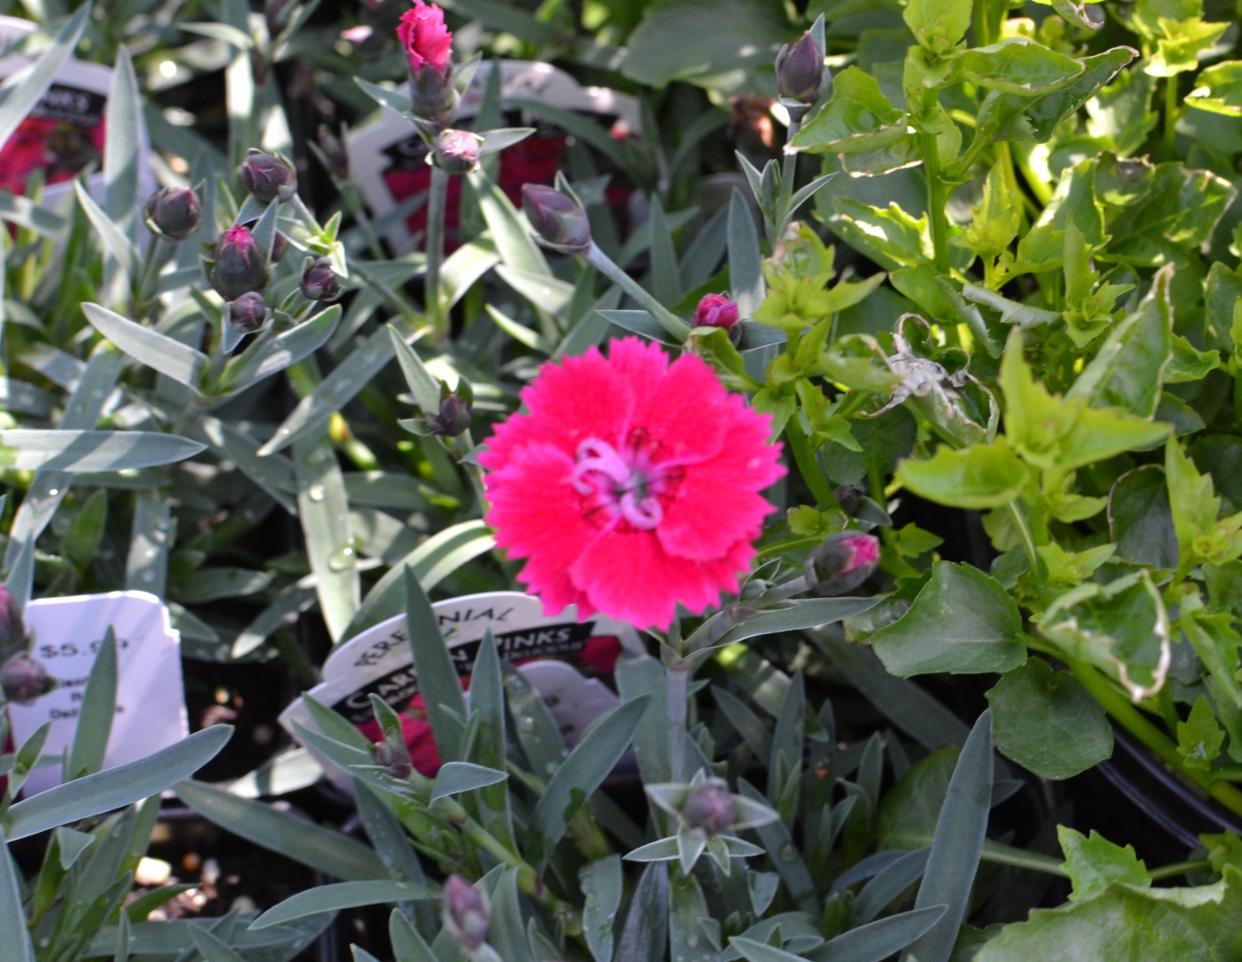 The dianthus family features more than 300 species and are considered low maintenance plants.